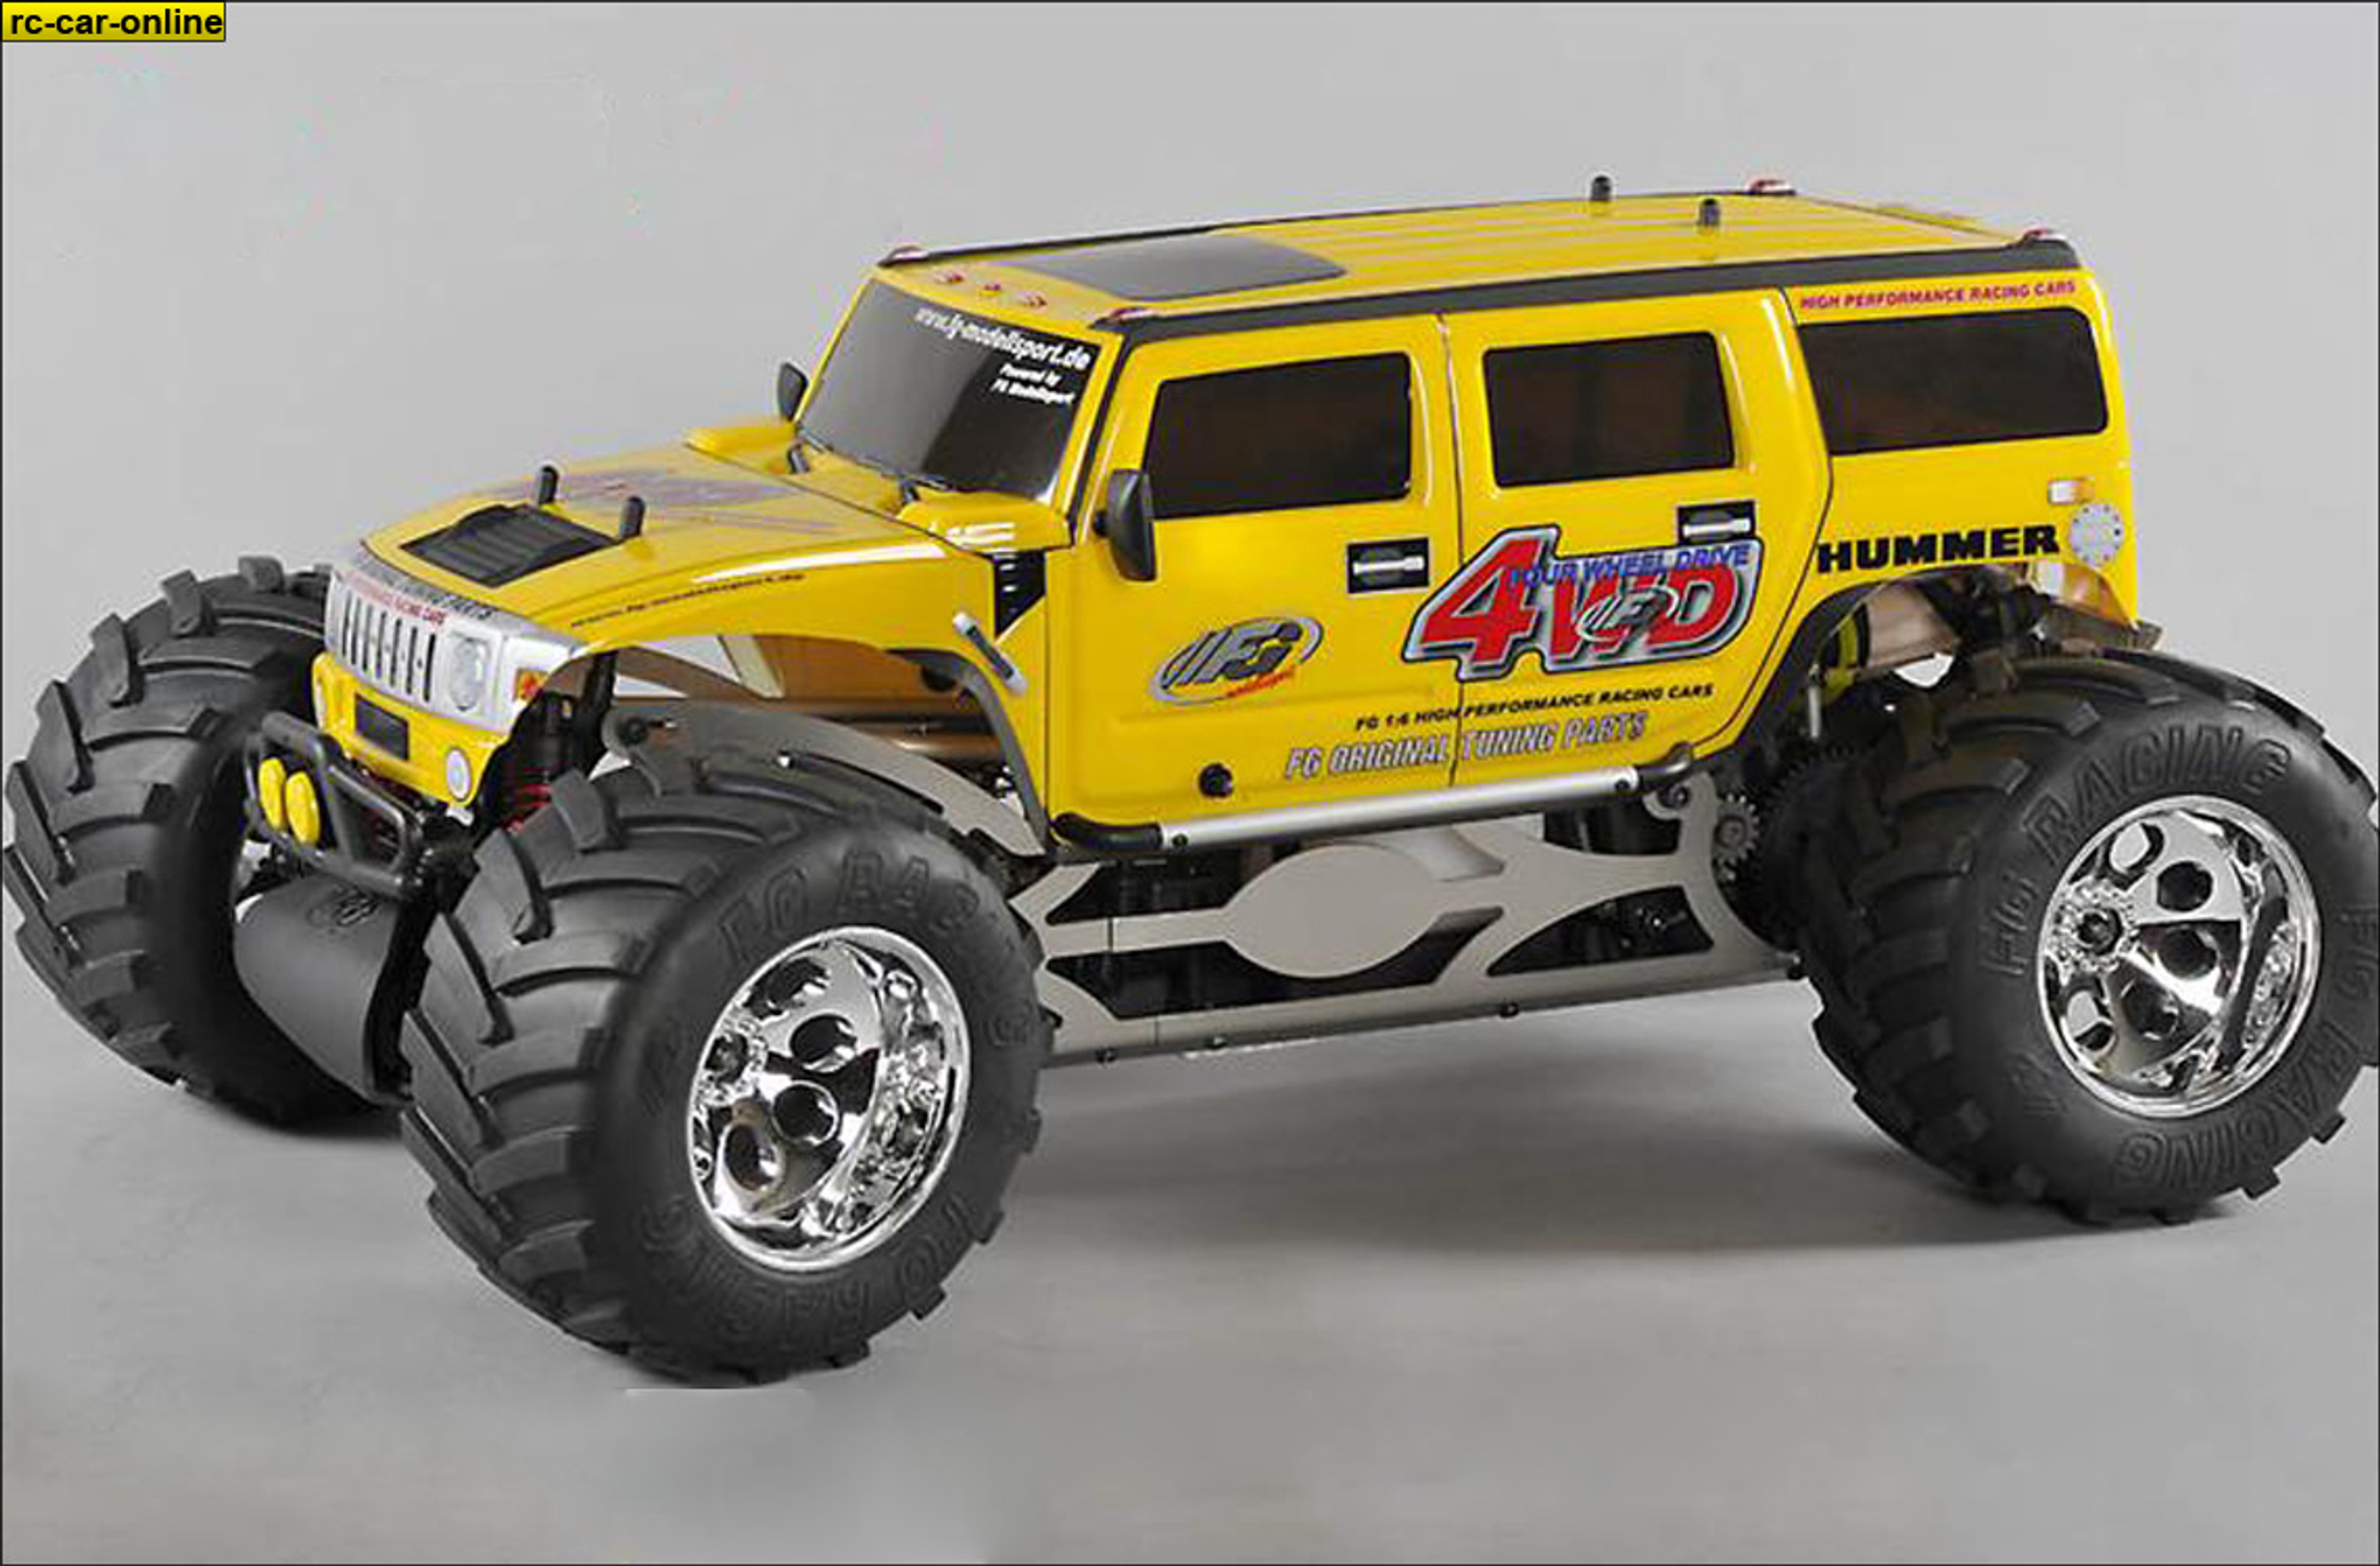 FG Monster Hummer WB535 4WD with yellow Body Shell